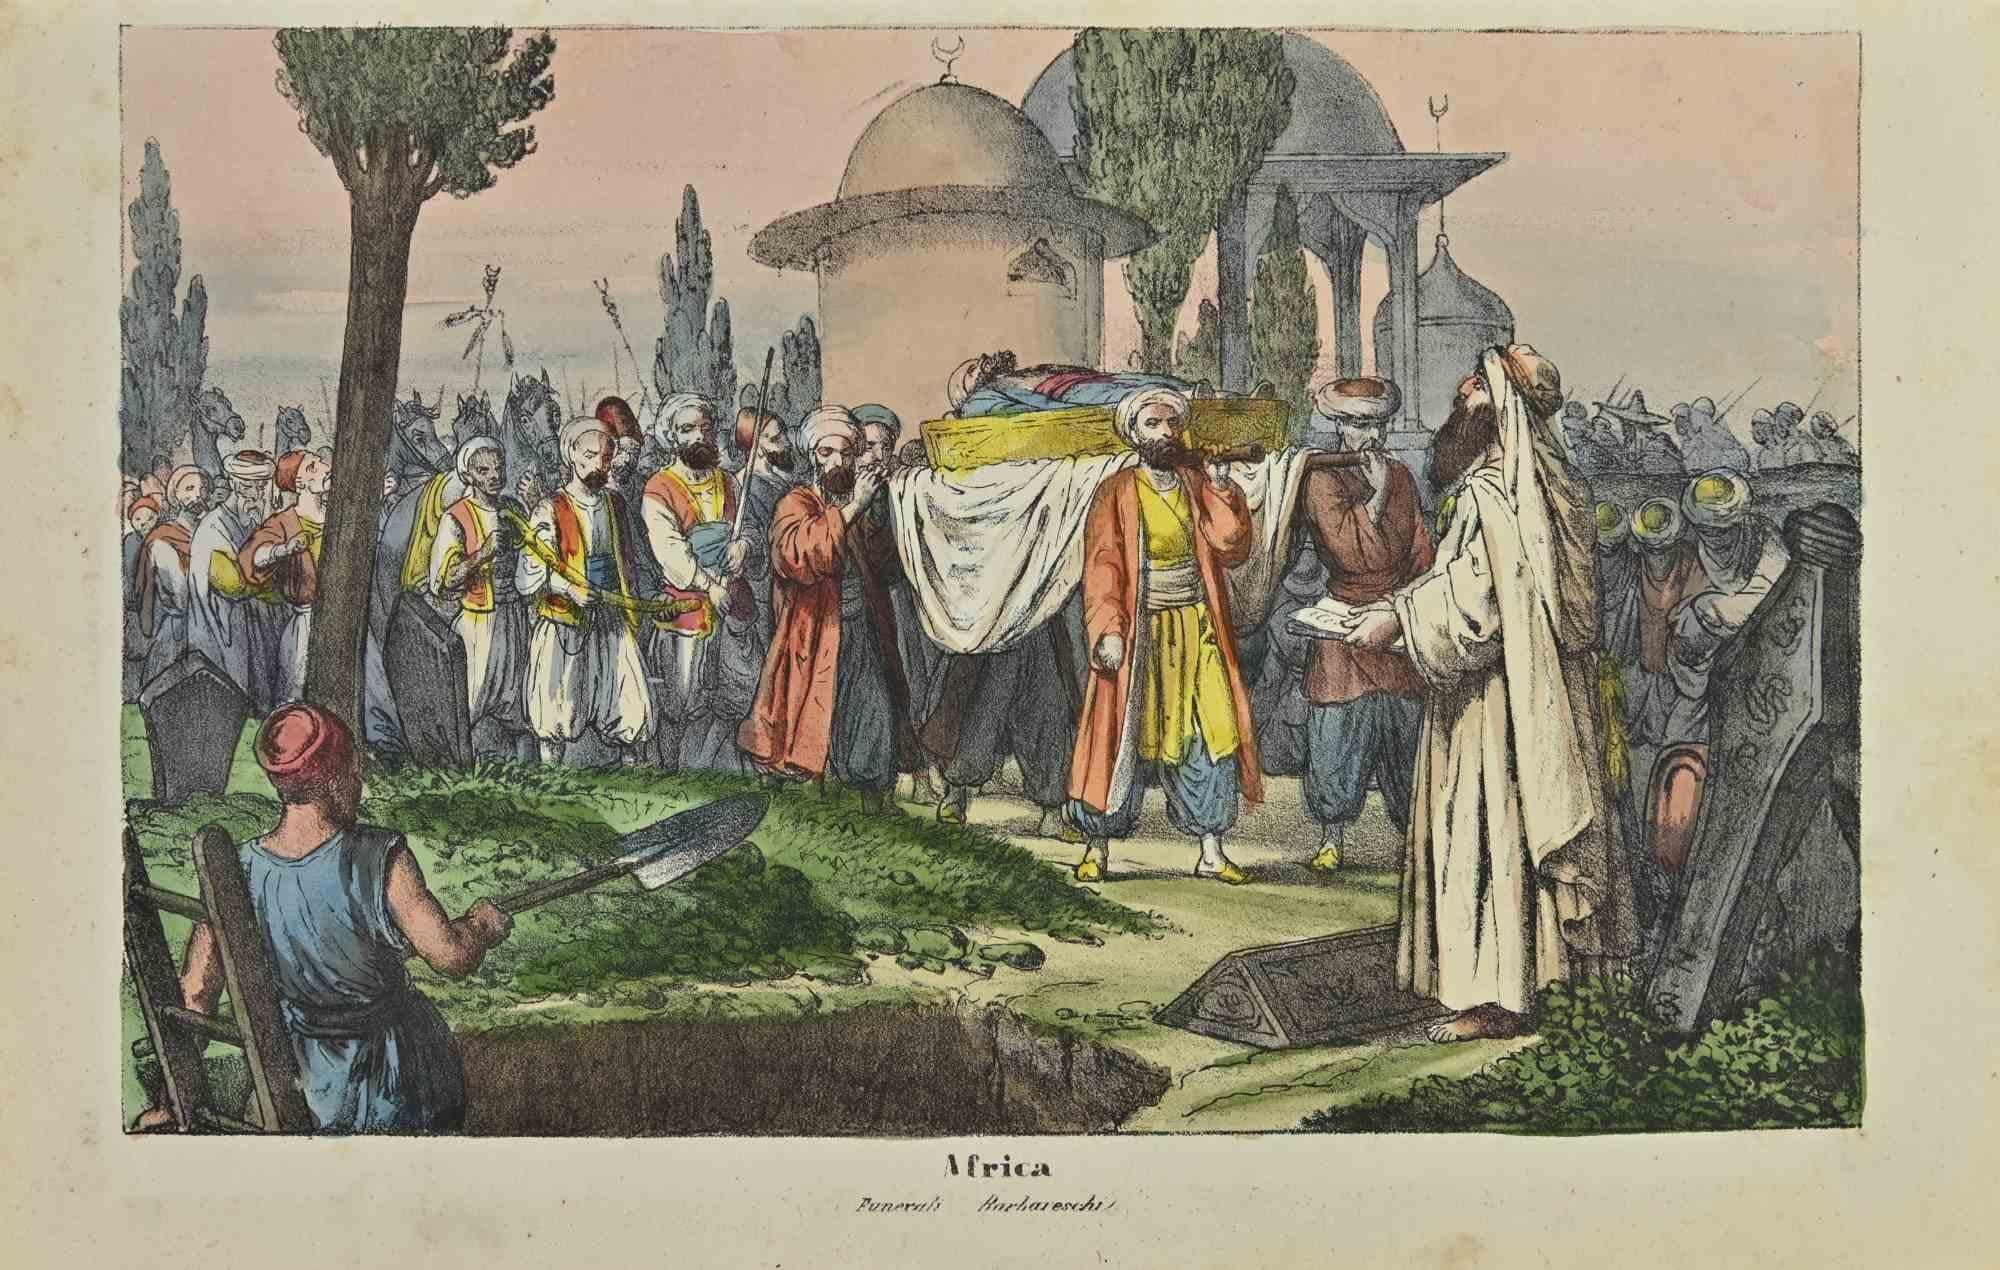 Ancient African Customs is a lithograph made by Auguste Wahlen in 1844.

Hand colored.

Good condition.

At the center of the artwork is the original title "Africa" and subtitle "Funerali Barbareschi" (translated, "Barbarous Funerals")

The work is